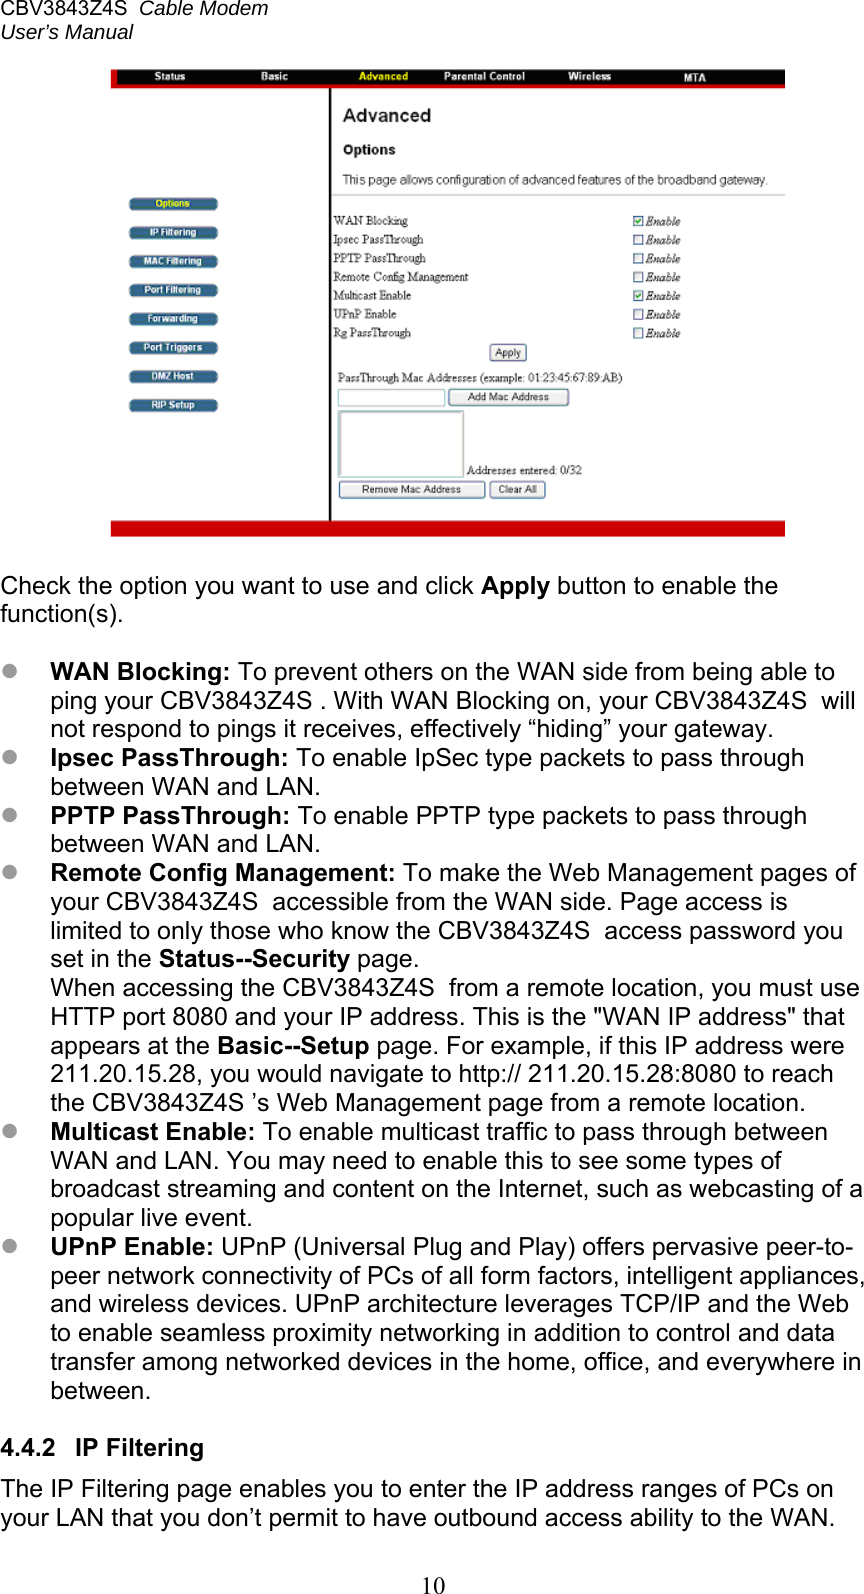 CBV3843Z4S  Cable Modem  User’s Manual   10   Check the option you want to use and click Apply button to enable the function(s).   WAN Blocking: To prevent others on the WAN side from being able to ping your CBV3843Z4S . With WAN Blocking on, your CBV3843Z4S  will not respond to pings it receives, effectively “hiding” your gateway.  Ipsec PassThrough: To enable IpSec type packets to pass through between WAN and LAN.  PPTP PassThrough: To enable PPTP type packets to pass through between WAN and LAN.  Remote Config Management: To make the Web Management pages of your CBV3843Z4S  accessible from the WAN side. Page access is limited to only those who know the CBV3843Z4S  access password you set in the Status--Security page. When accessing the CBV3843Z4S  from a remote location, you must use HTTP port 8080 and your IP address. This is the &quot;WAN IP address&quot; that appears at the Basic--Setup page. For example, if this IP address were 211.20.15.28, you would navigate to http:// 211.20.15.28:8080 to reach the CBV3843Z4S ’s Web Management page from a remote location.  Multicast Enable: To enable multicast traffic to pass through between WAN and LAN. You may need to enable this to see some types of broadcast streaming and content on the Internet, such as webcasting of a popular live event.  UPnP Enable: UPnP (Universal Plug and Play) offers pervasive peer-to-peer network connectivity of PCs of all form factors, intelligent appliances, and wireless devices. UPnP architecture leverages TCP/IP and the Web to enable seamless proximity networking in addition to control and data transfer among networked devices in the home, office, and everywhere in between.  4.4.2  IP Filtering The IP Filtering page enables you to enter the IP address ranges of PCs on your LAN that you don’t permit to have outbound access ability to the WAN. 